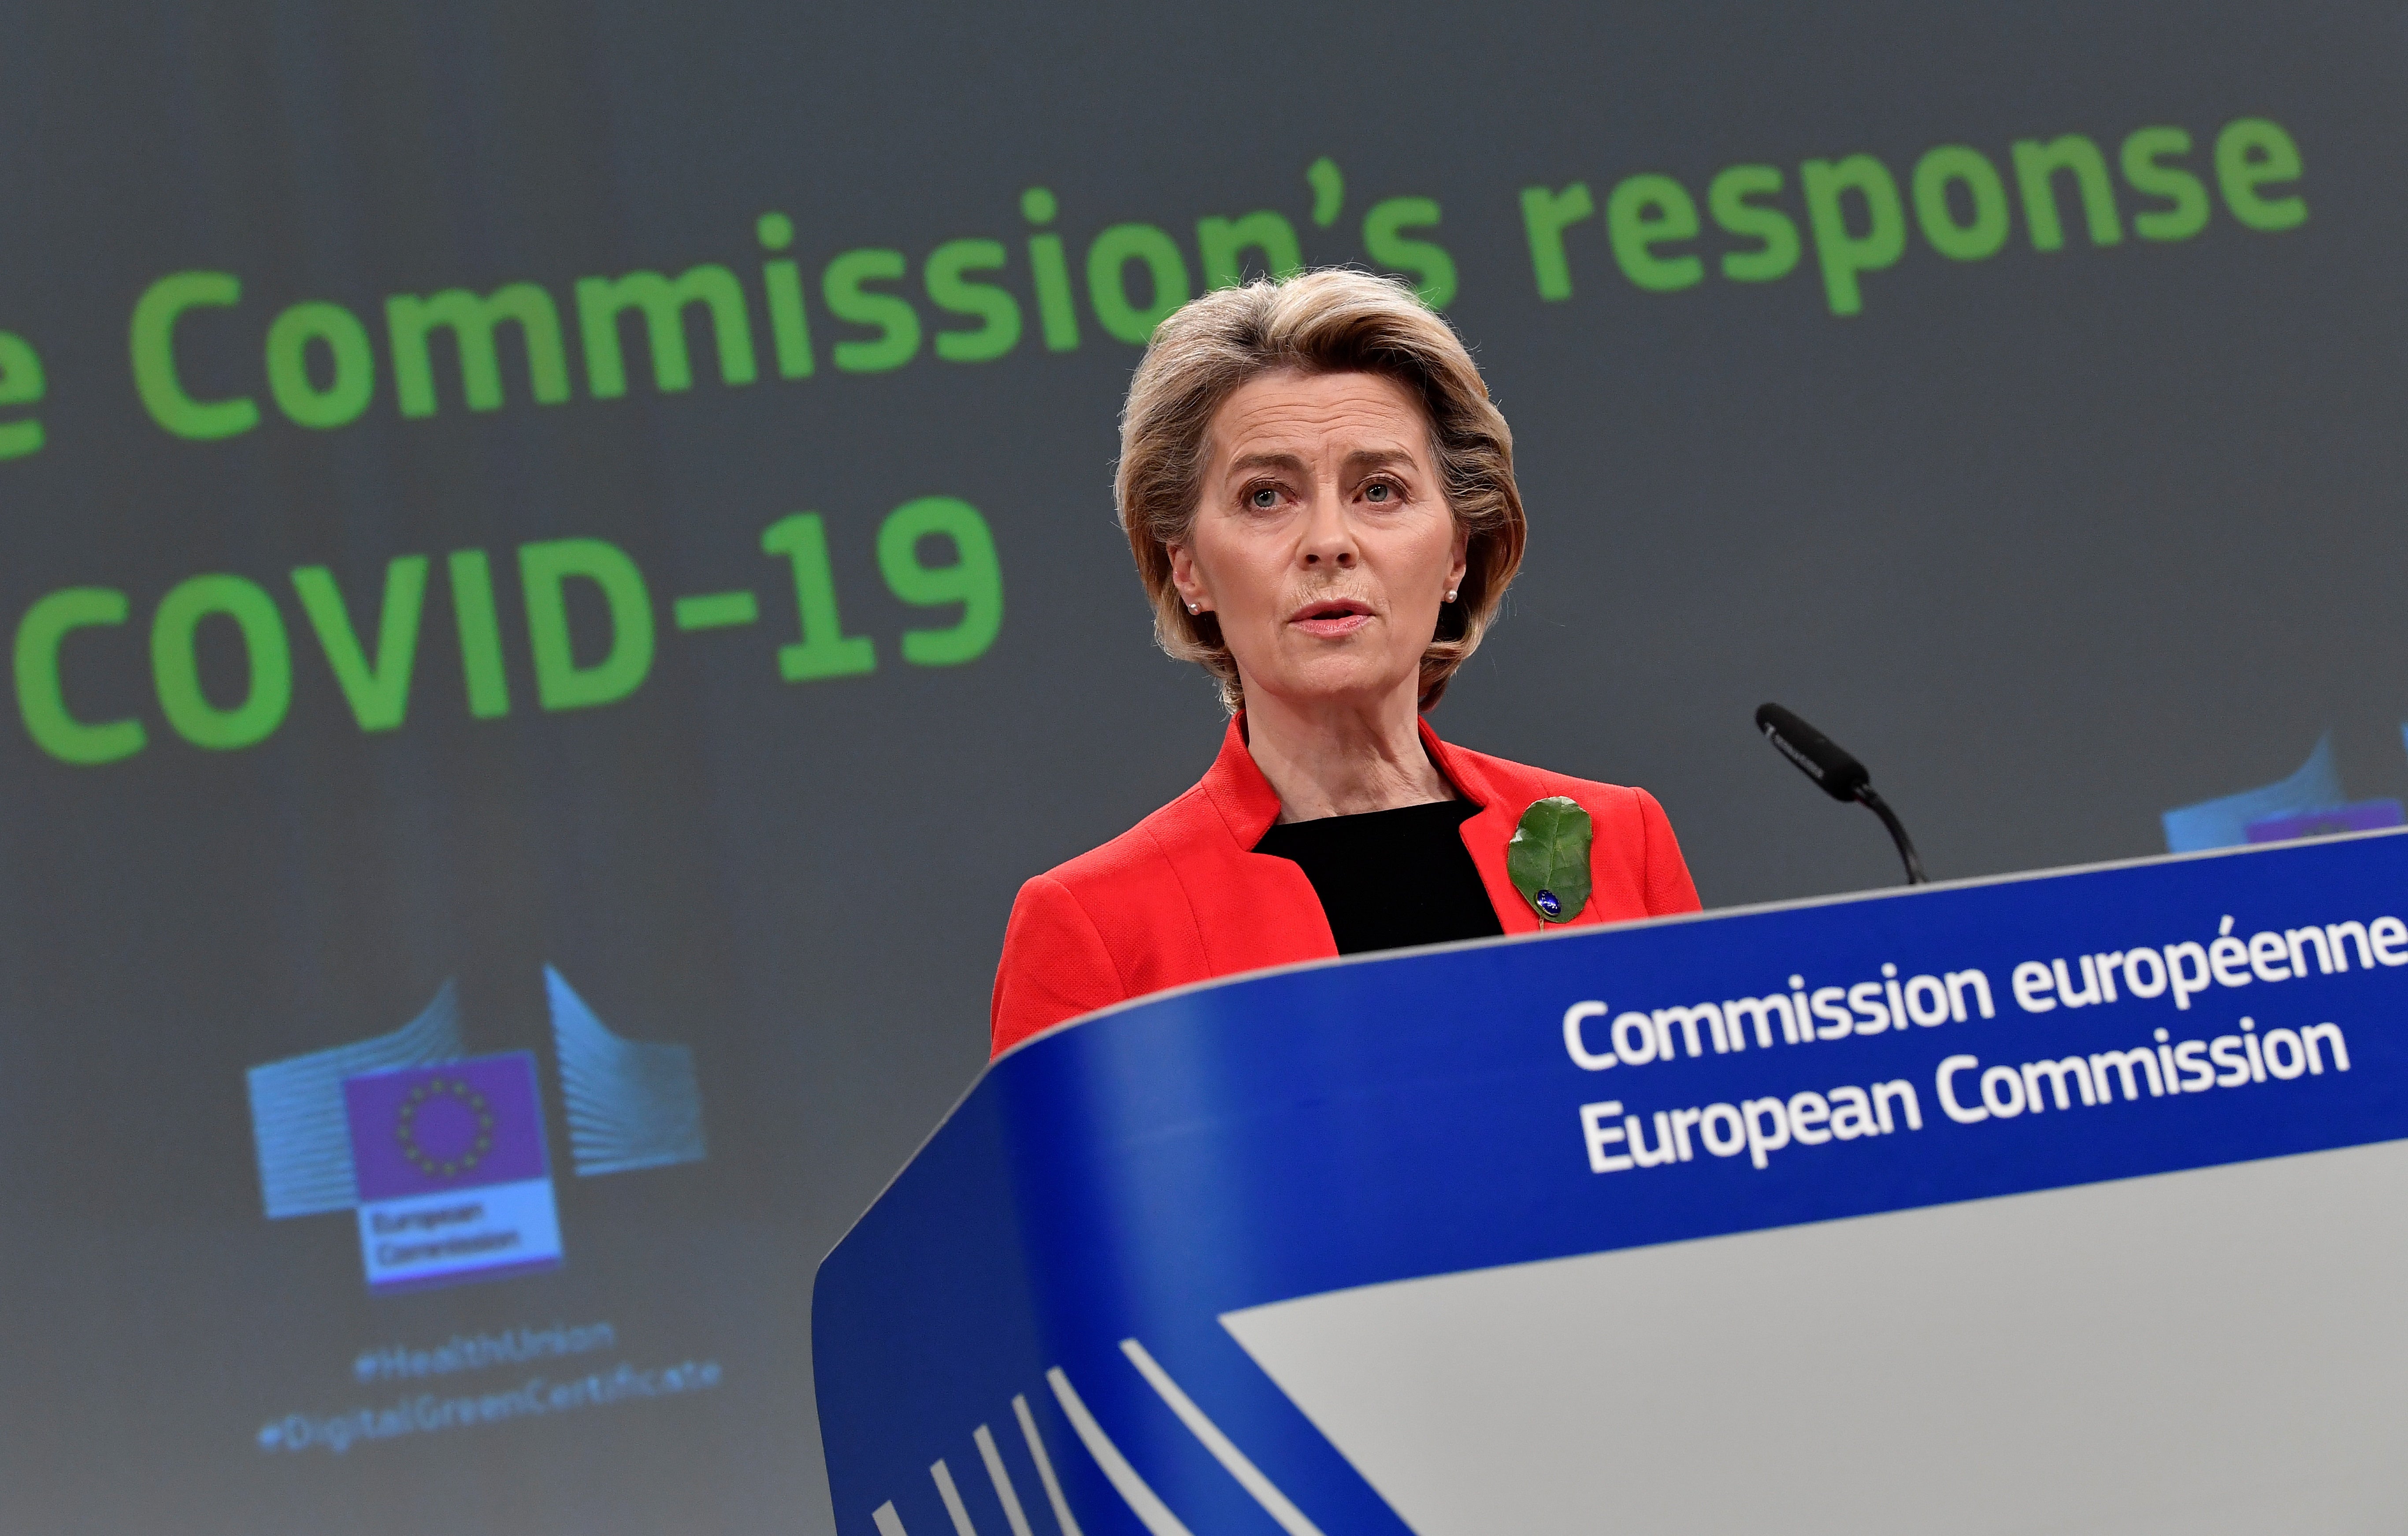 Ursula von der Leyen at a press conference following a college meeting to introduce draft legislation on a common EU Covid-19 vaccination certificate, in Brussels on 17 March